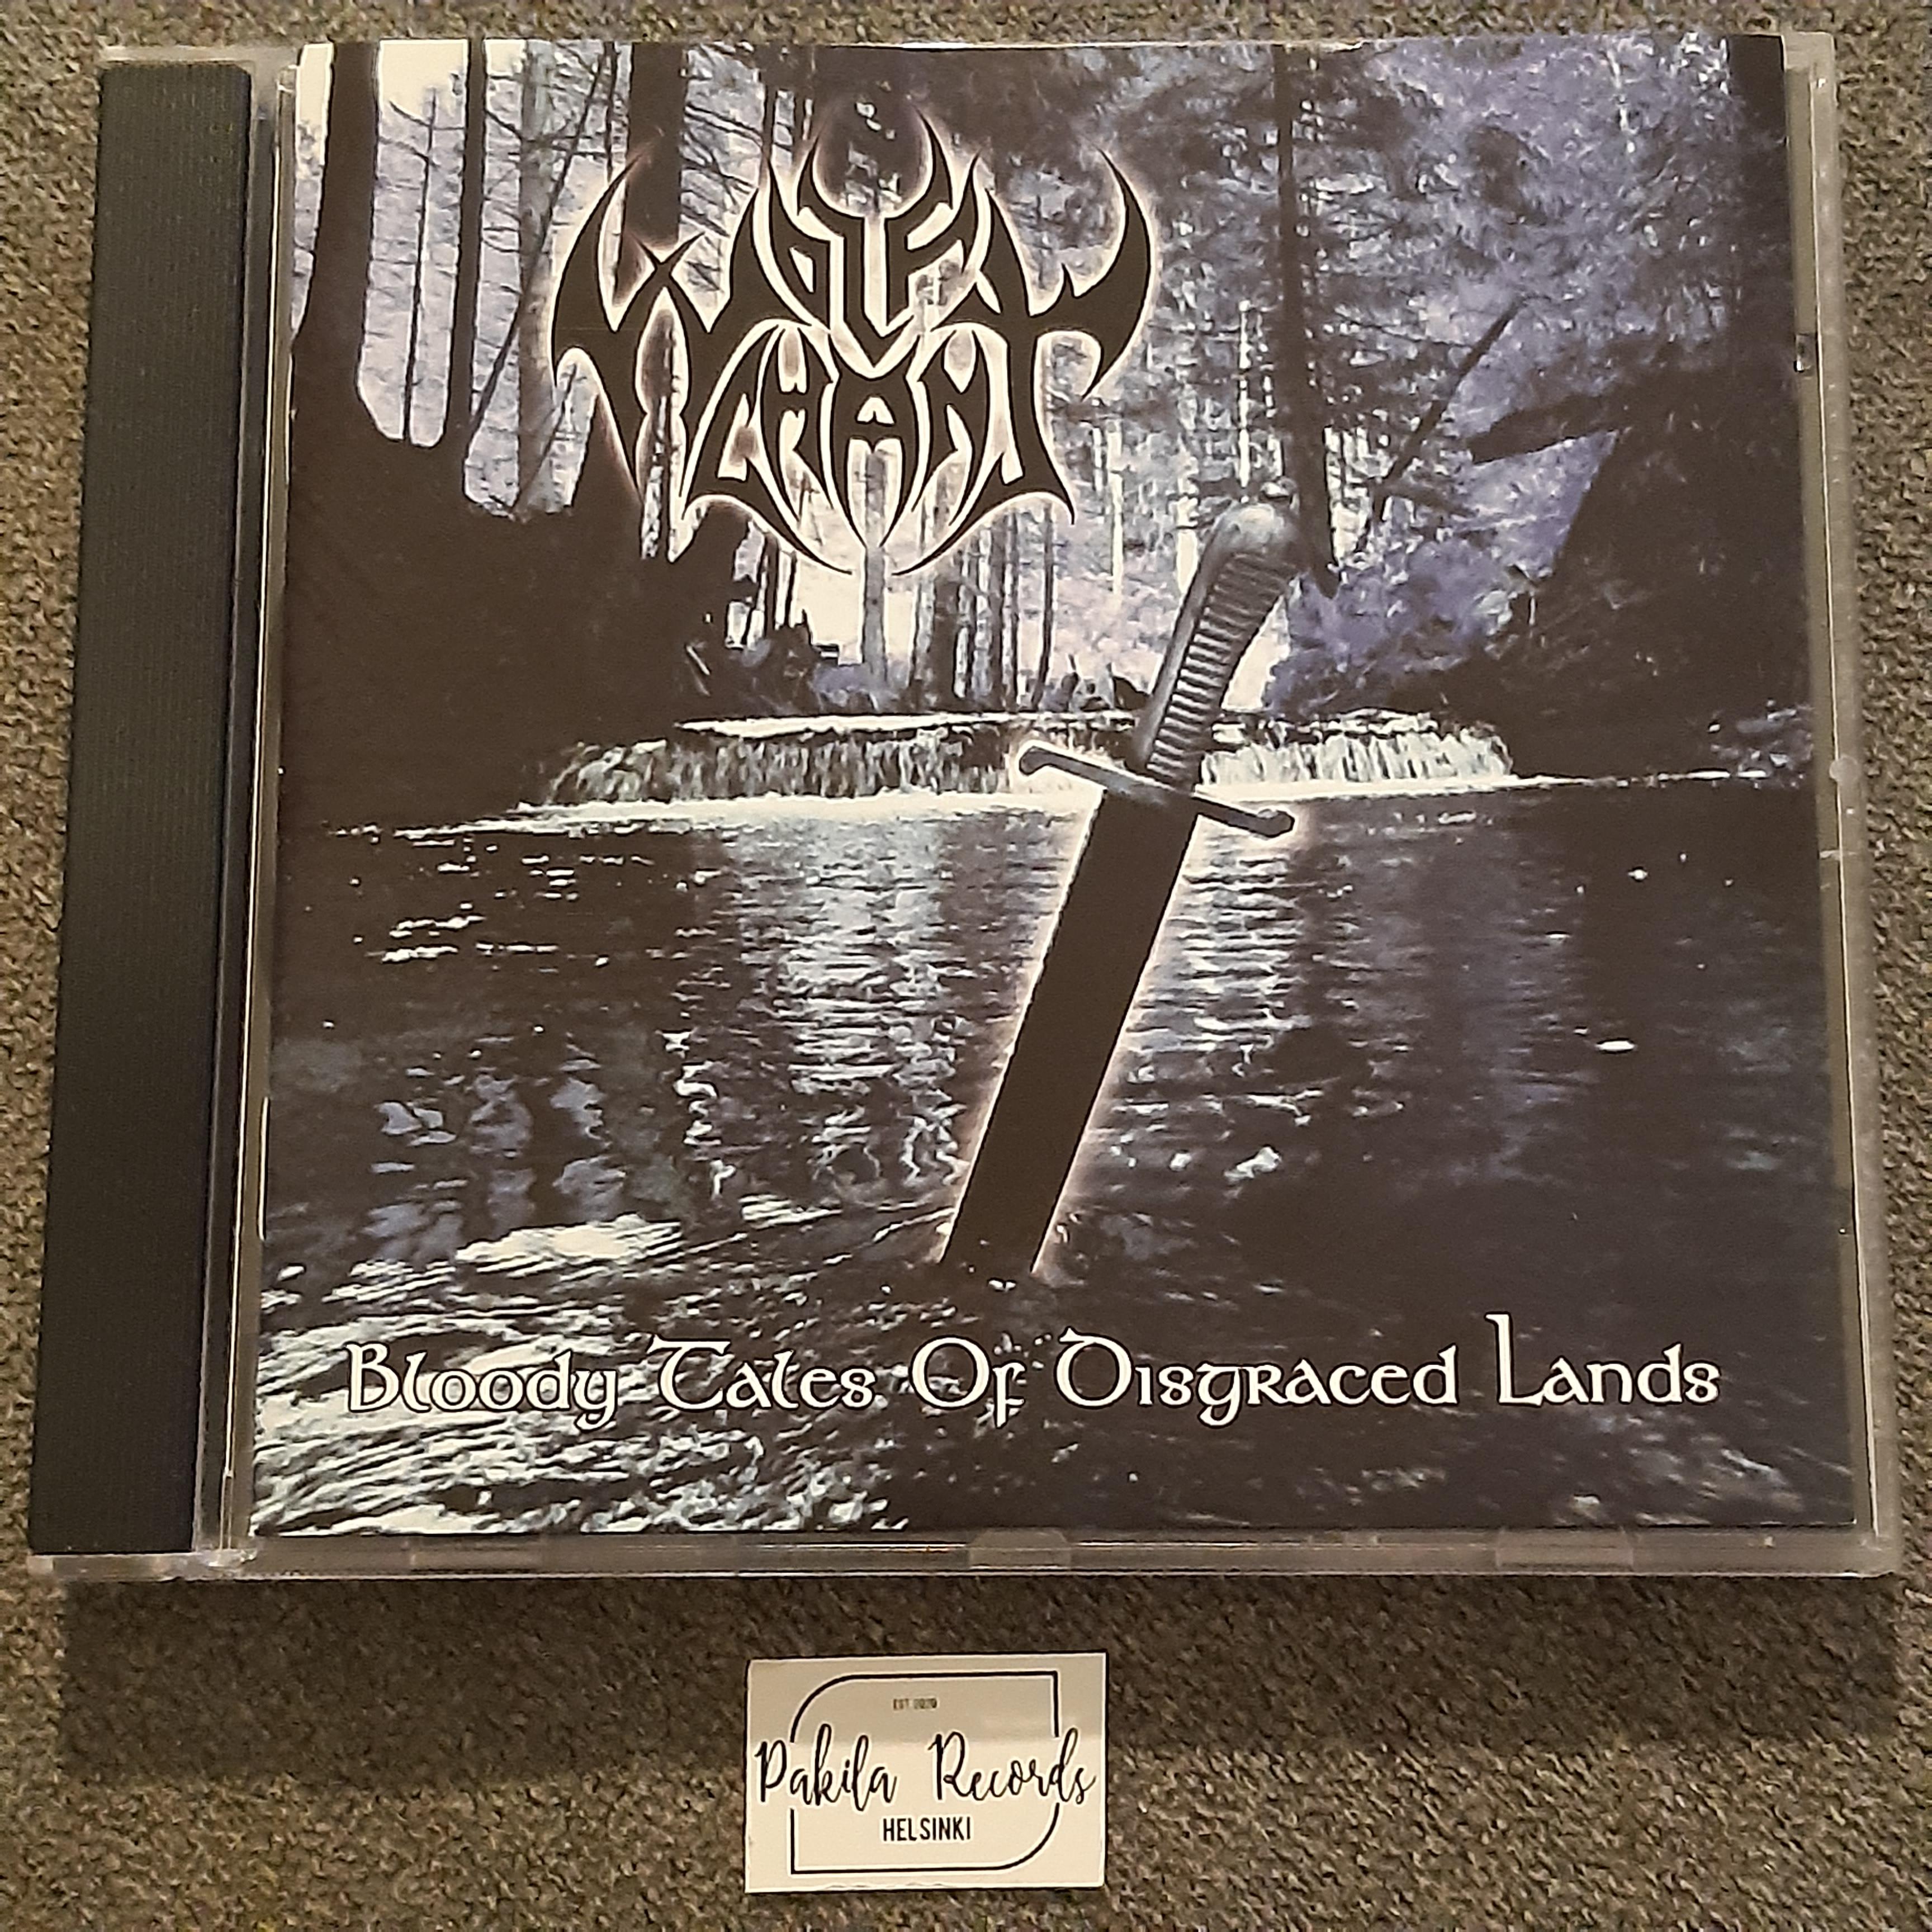 Wolfchant - Bloody Tales Of Disgraced Lands - CD (käytetty)